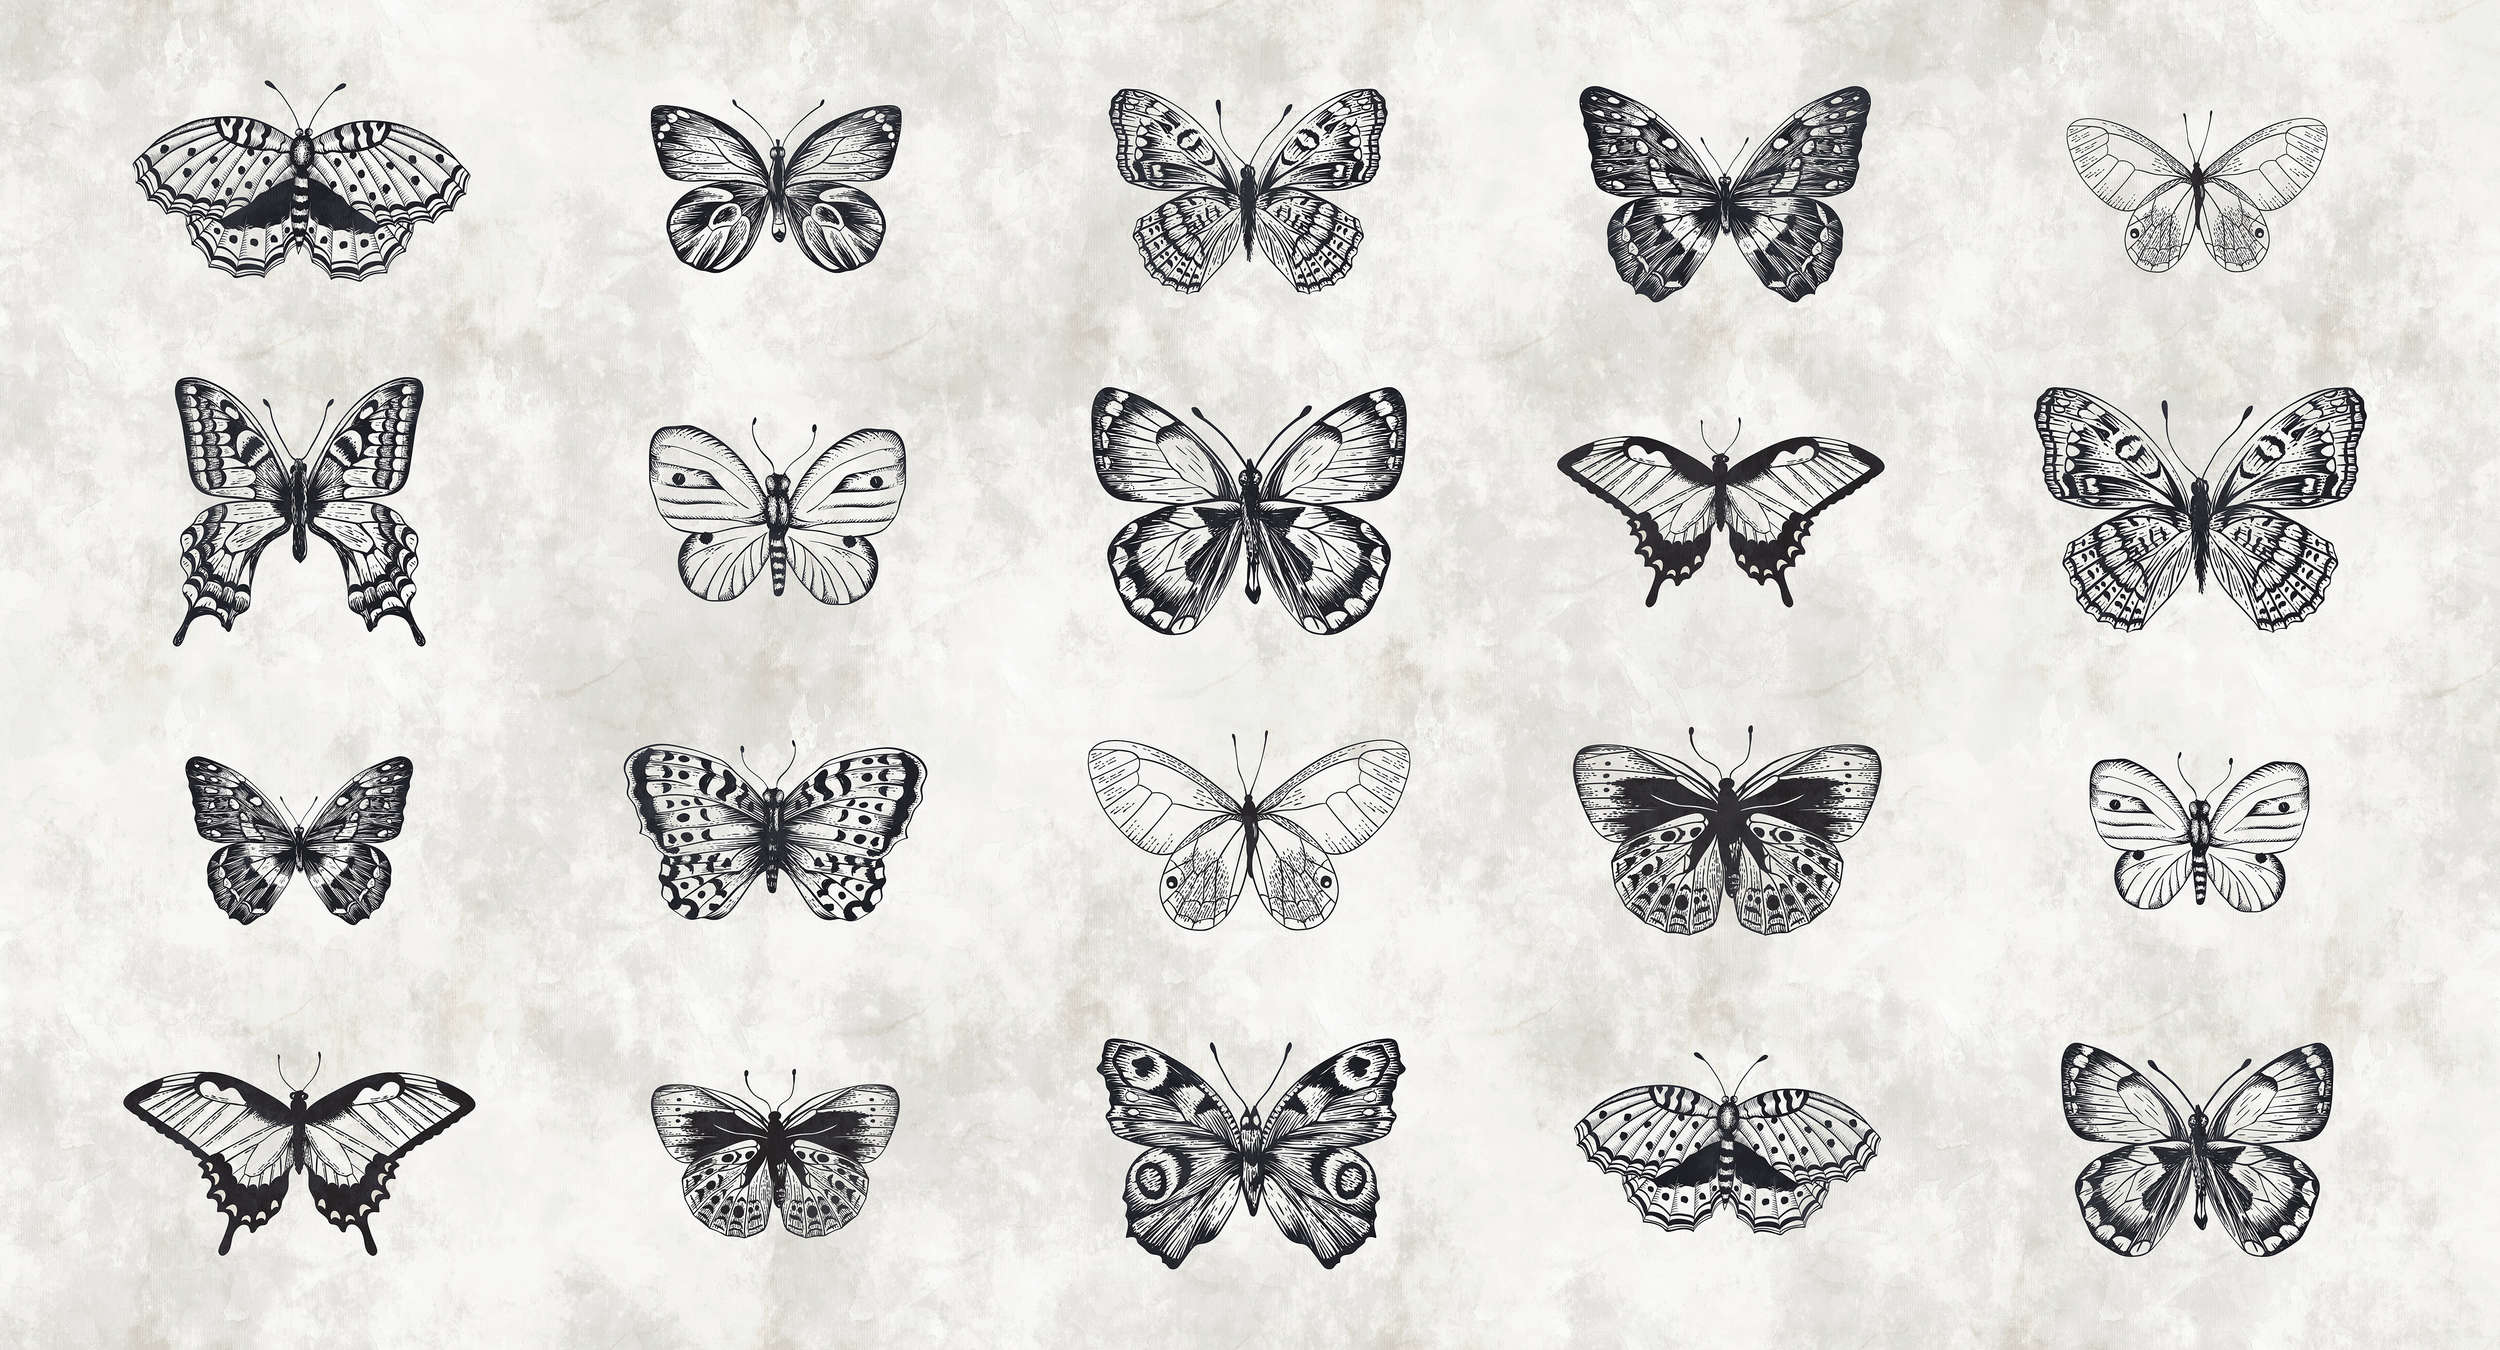             Butterfly mural black and white drawings
        